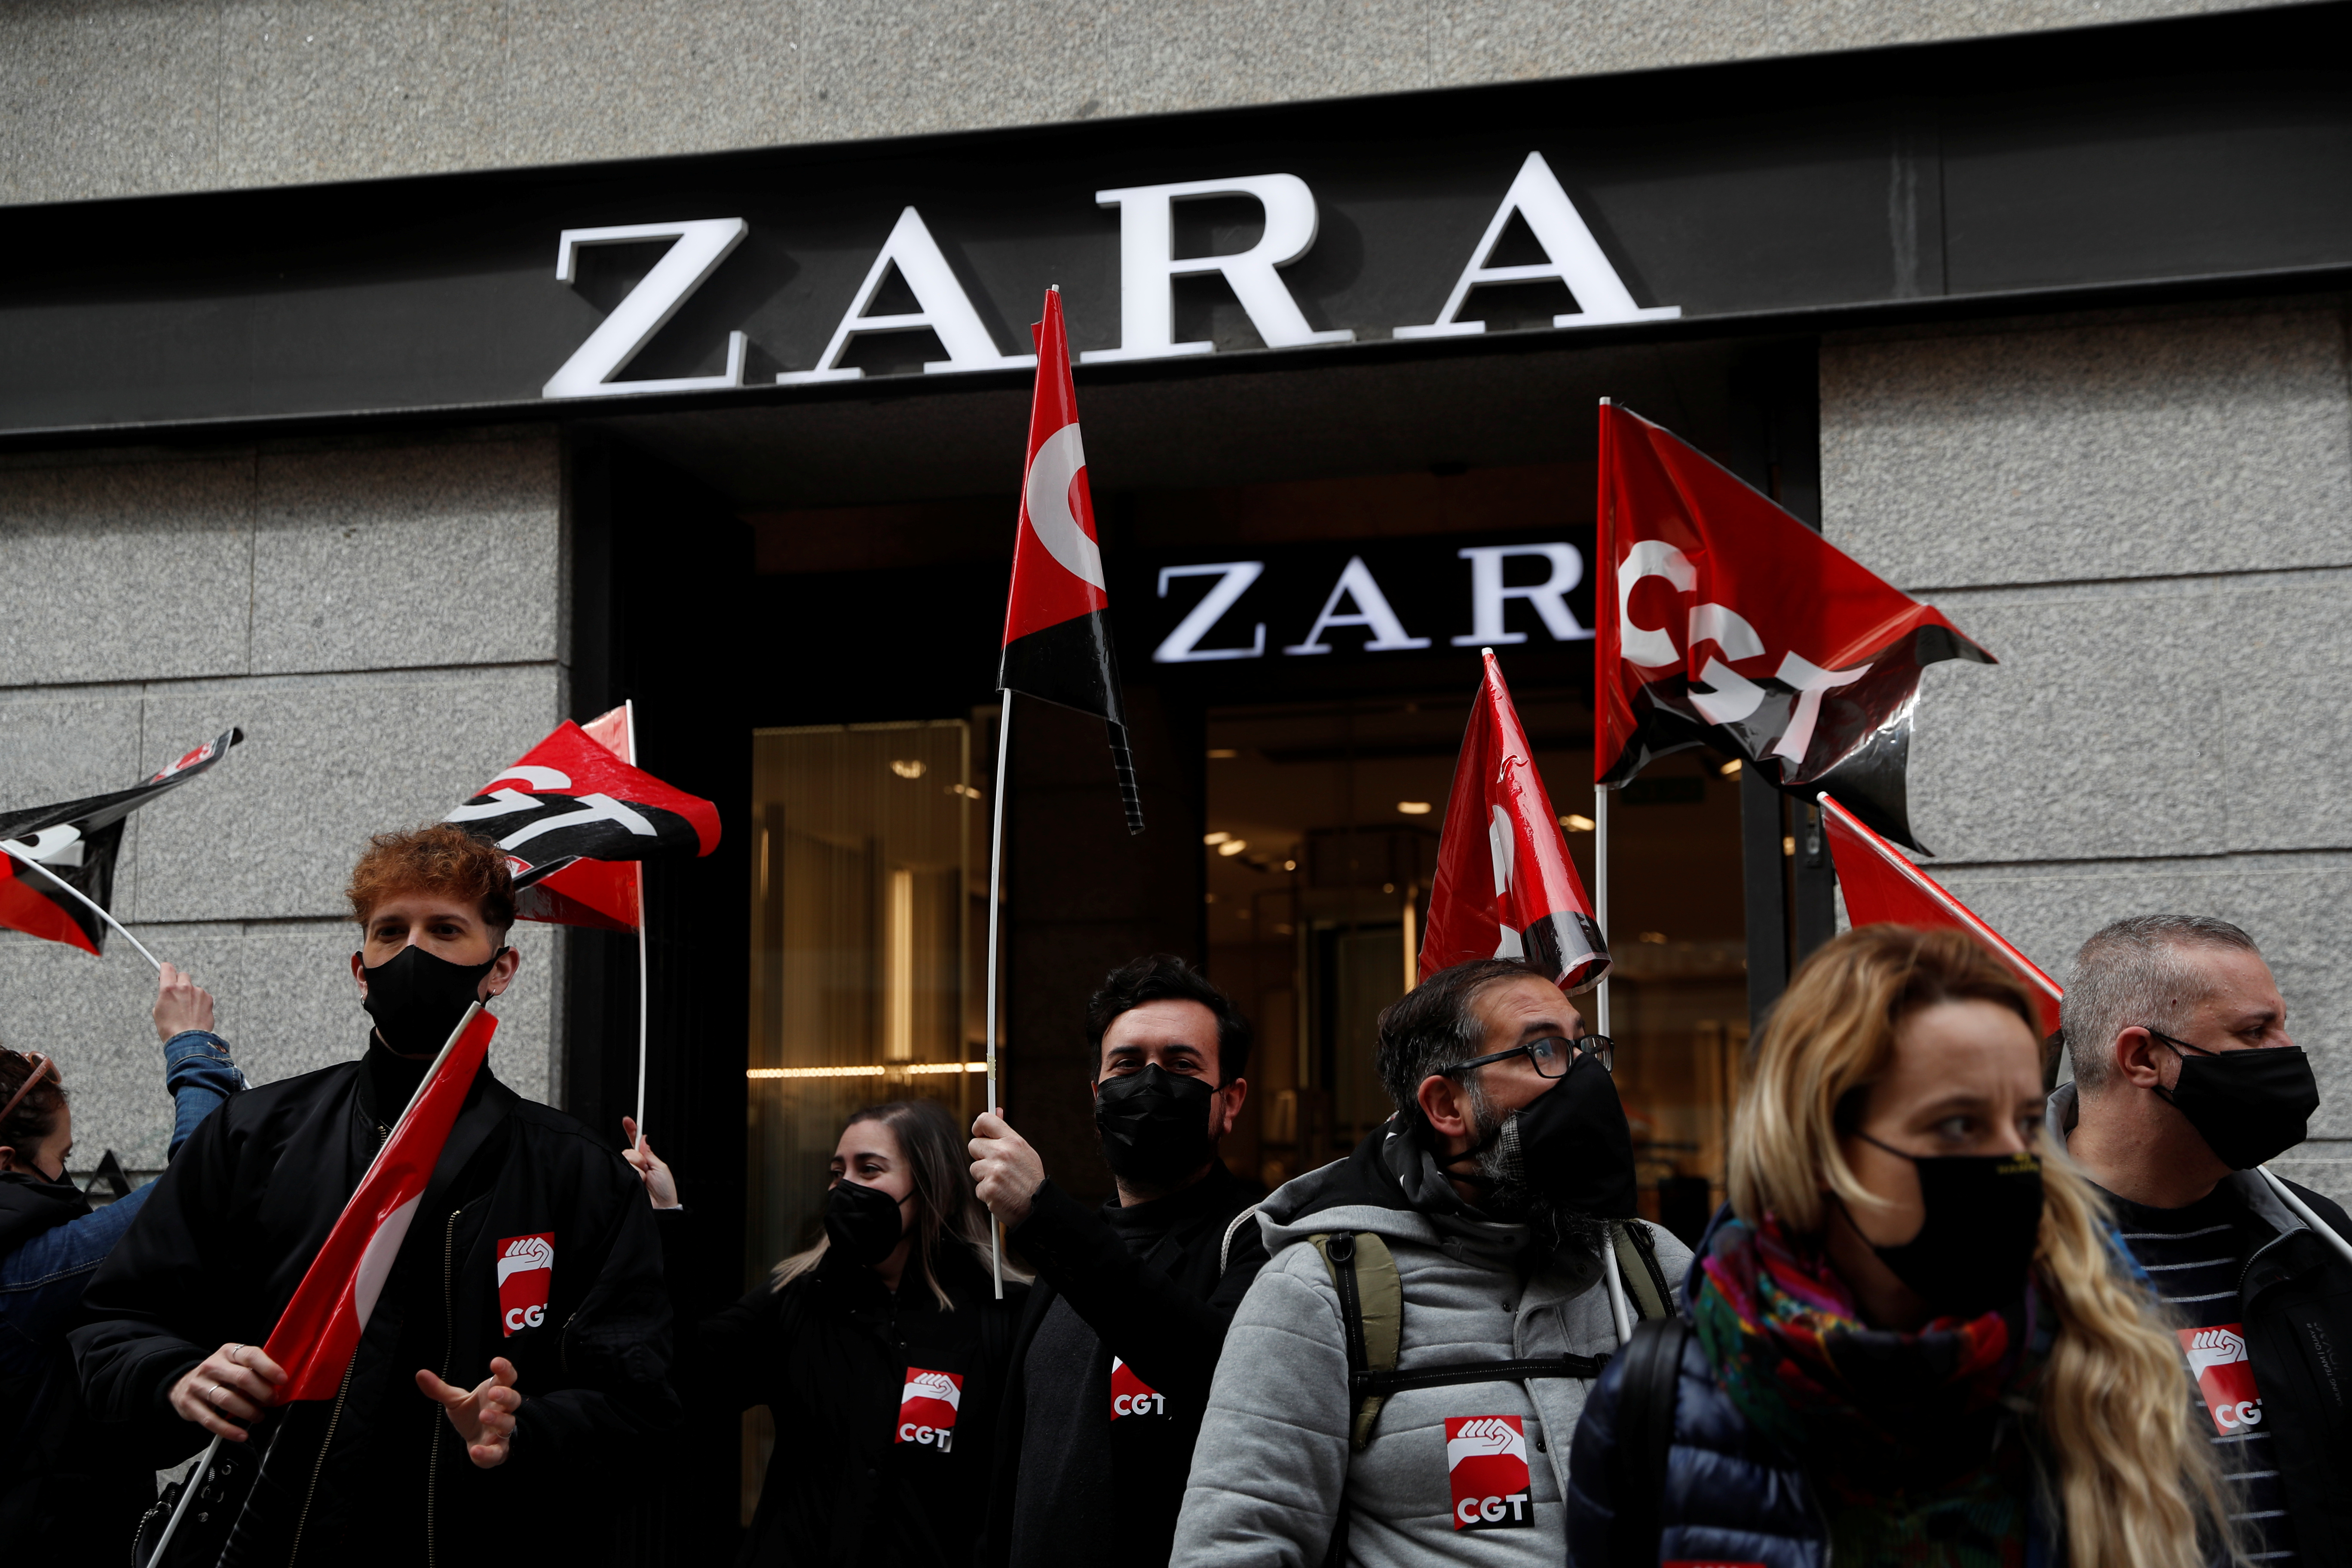 People hold flags from Spain's CGT labour union as they protest outside a Zara clothing store, an Inditex brand, in Madrid, Spain, February 25, 2021. REUTERS/Susana Vera